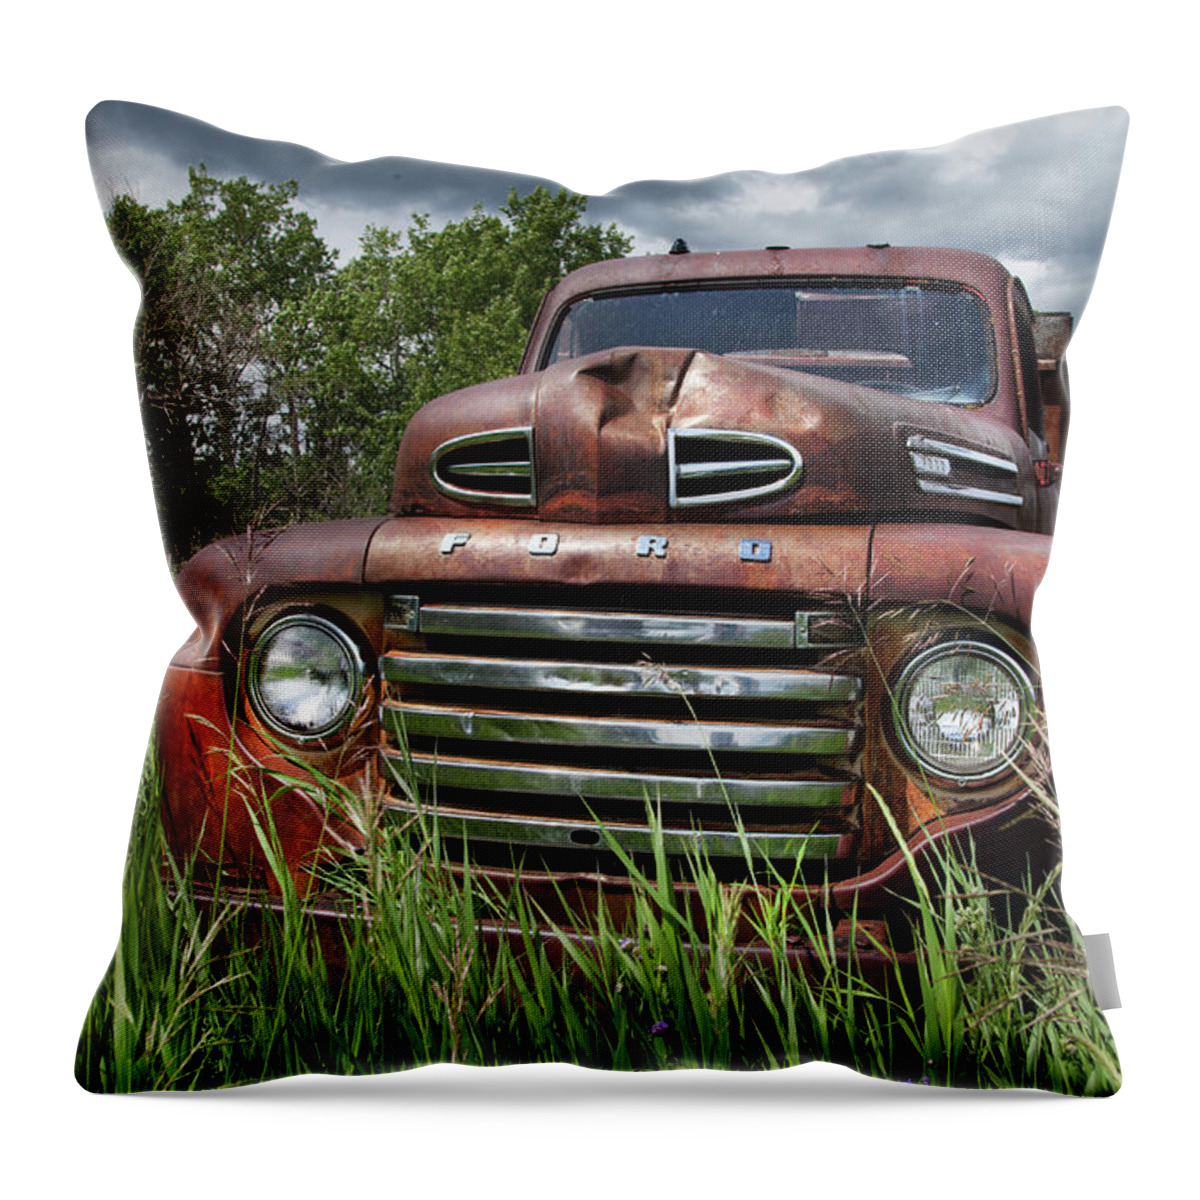 Rusty Trucks Throw Pillow featuring the photograph Vintage Ford Truck by Theresa Tahara